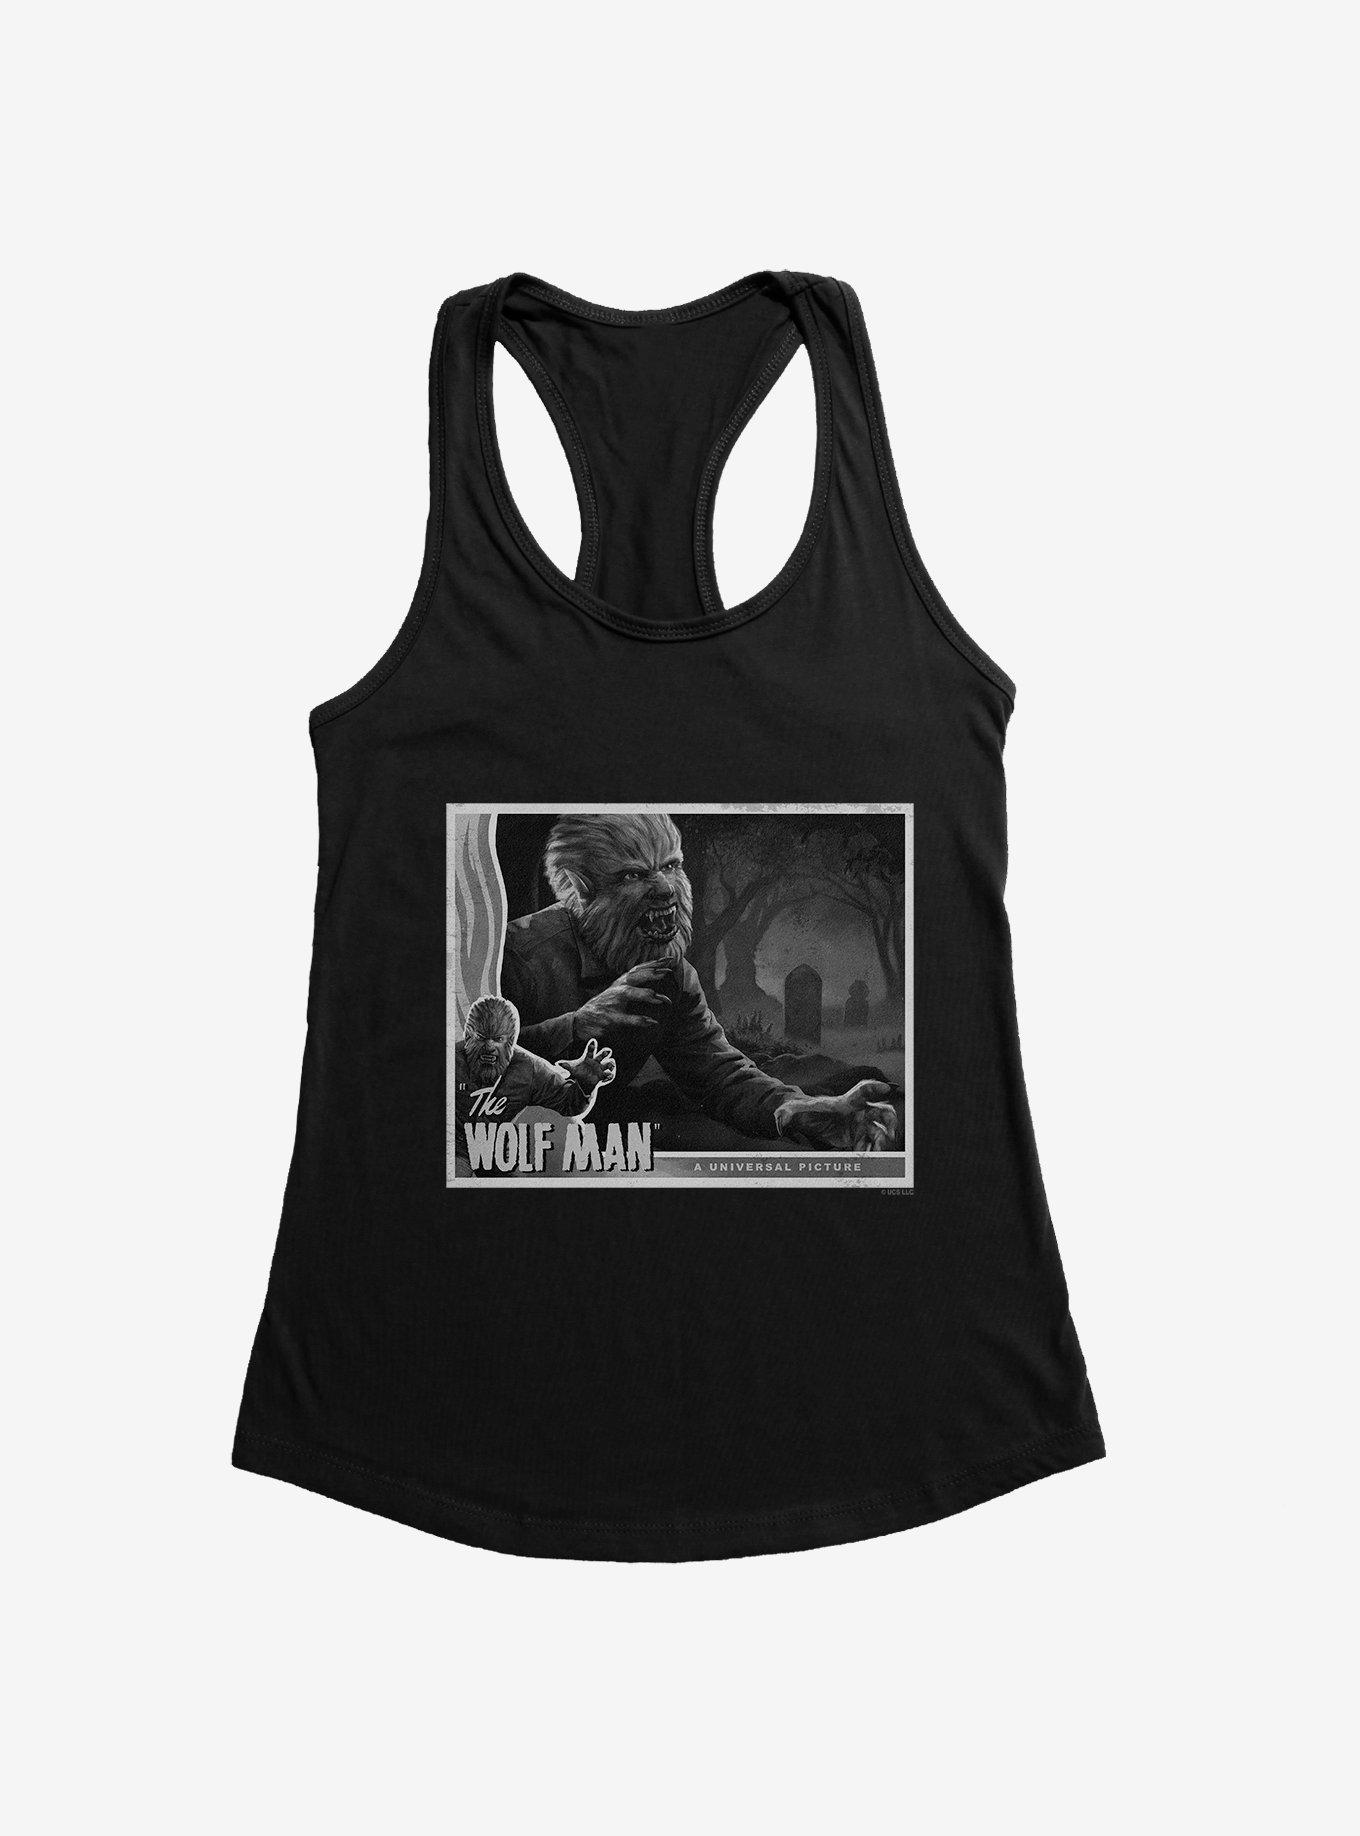 The Wolf Man Black And White Movie Poster Girls Tank